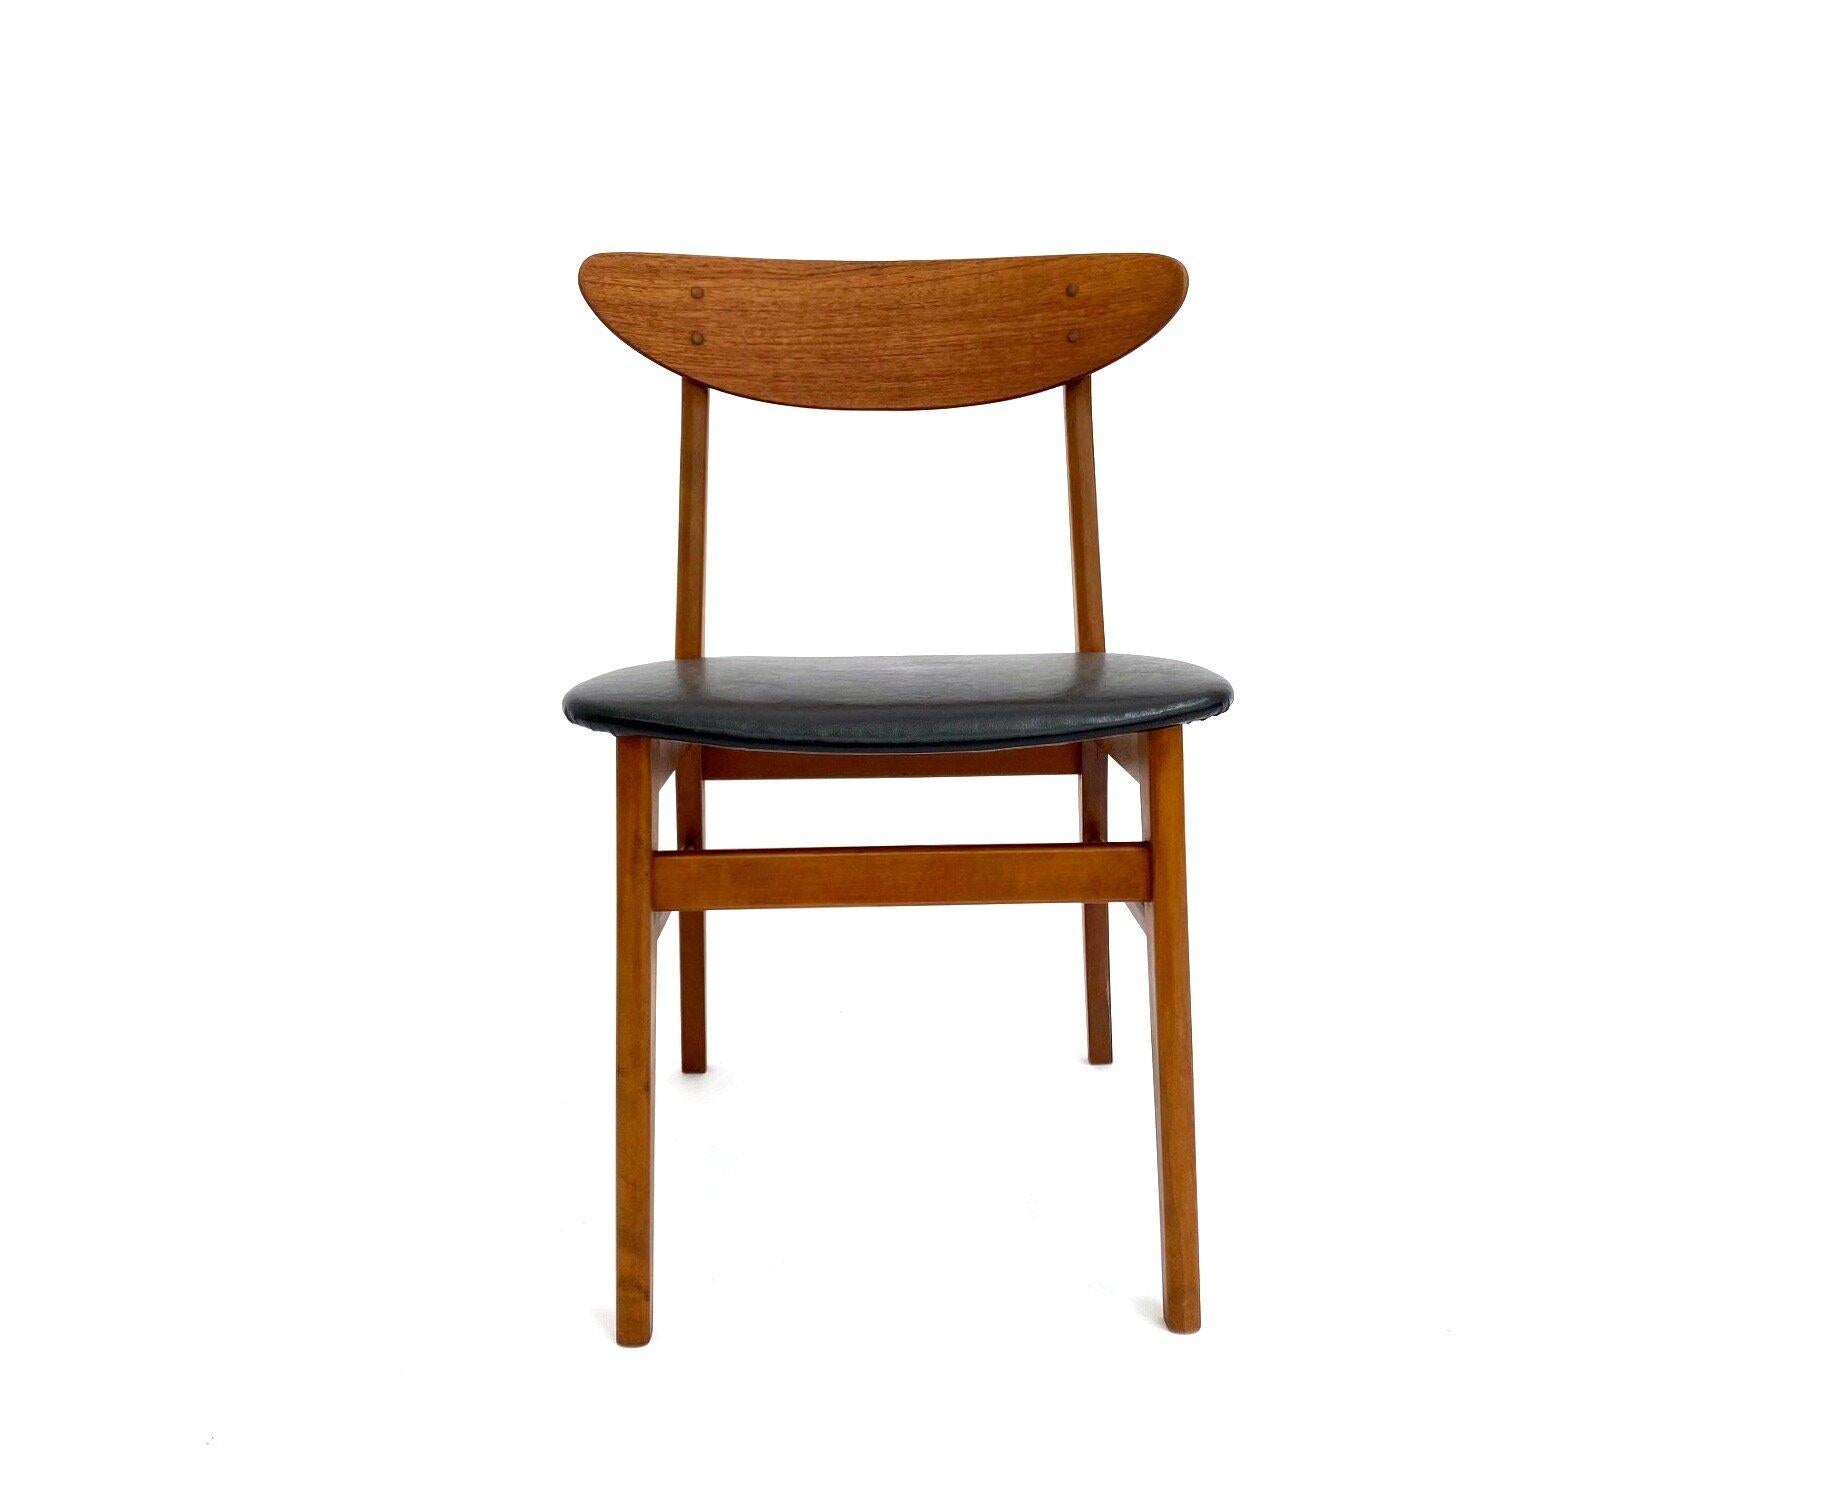 A beautiful set of 6 teak & beech black vinyl Model 210 dining chairs by Farstrup, these would make a stylish addition to any dining area.

The chairs have wide seat pads and sculptured timber backrests for enhanced comfort. A striking piece of